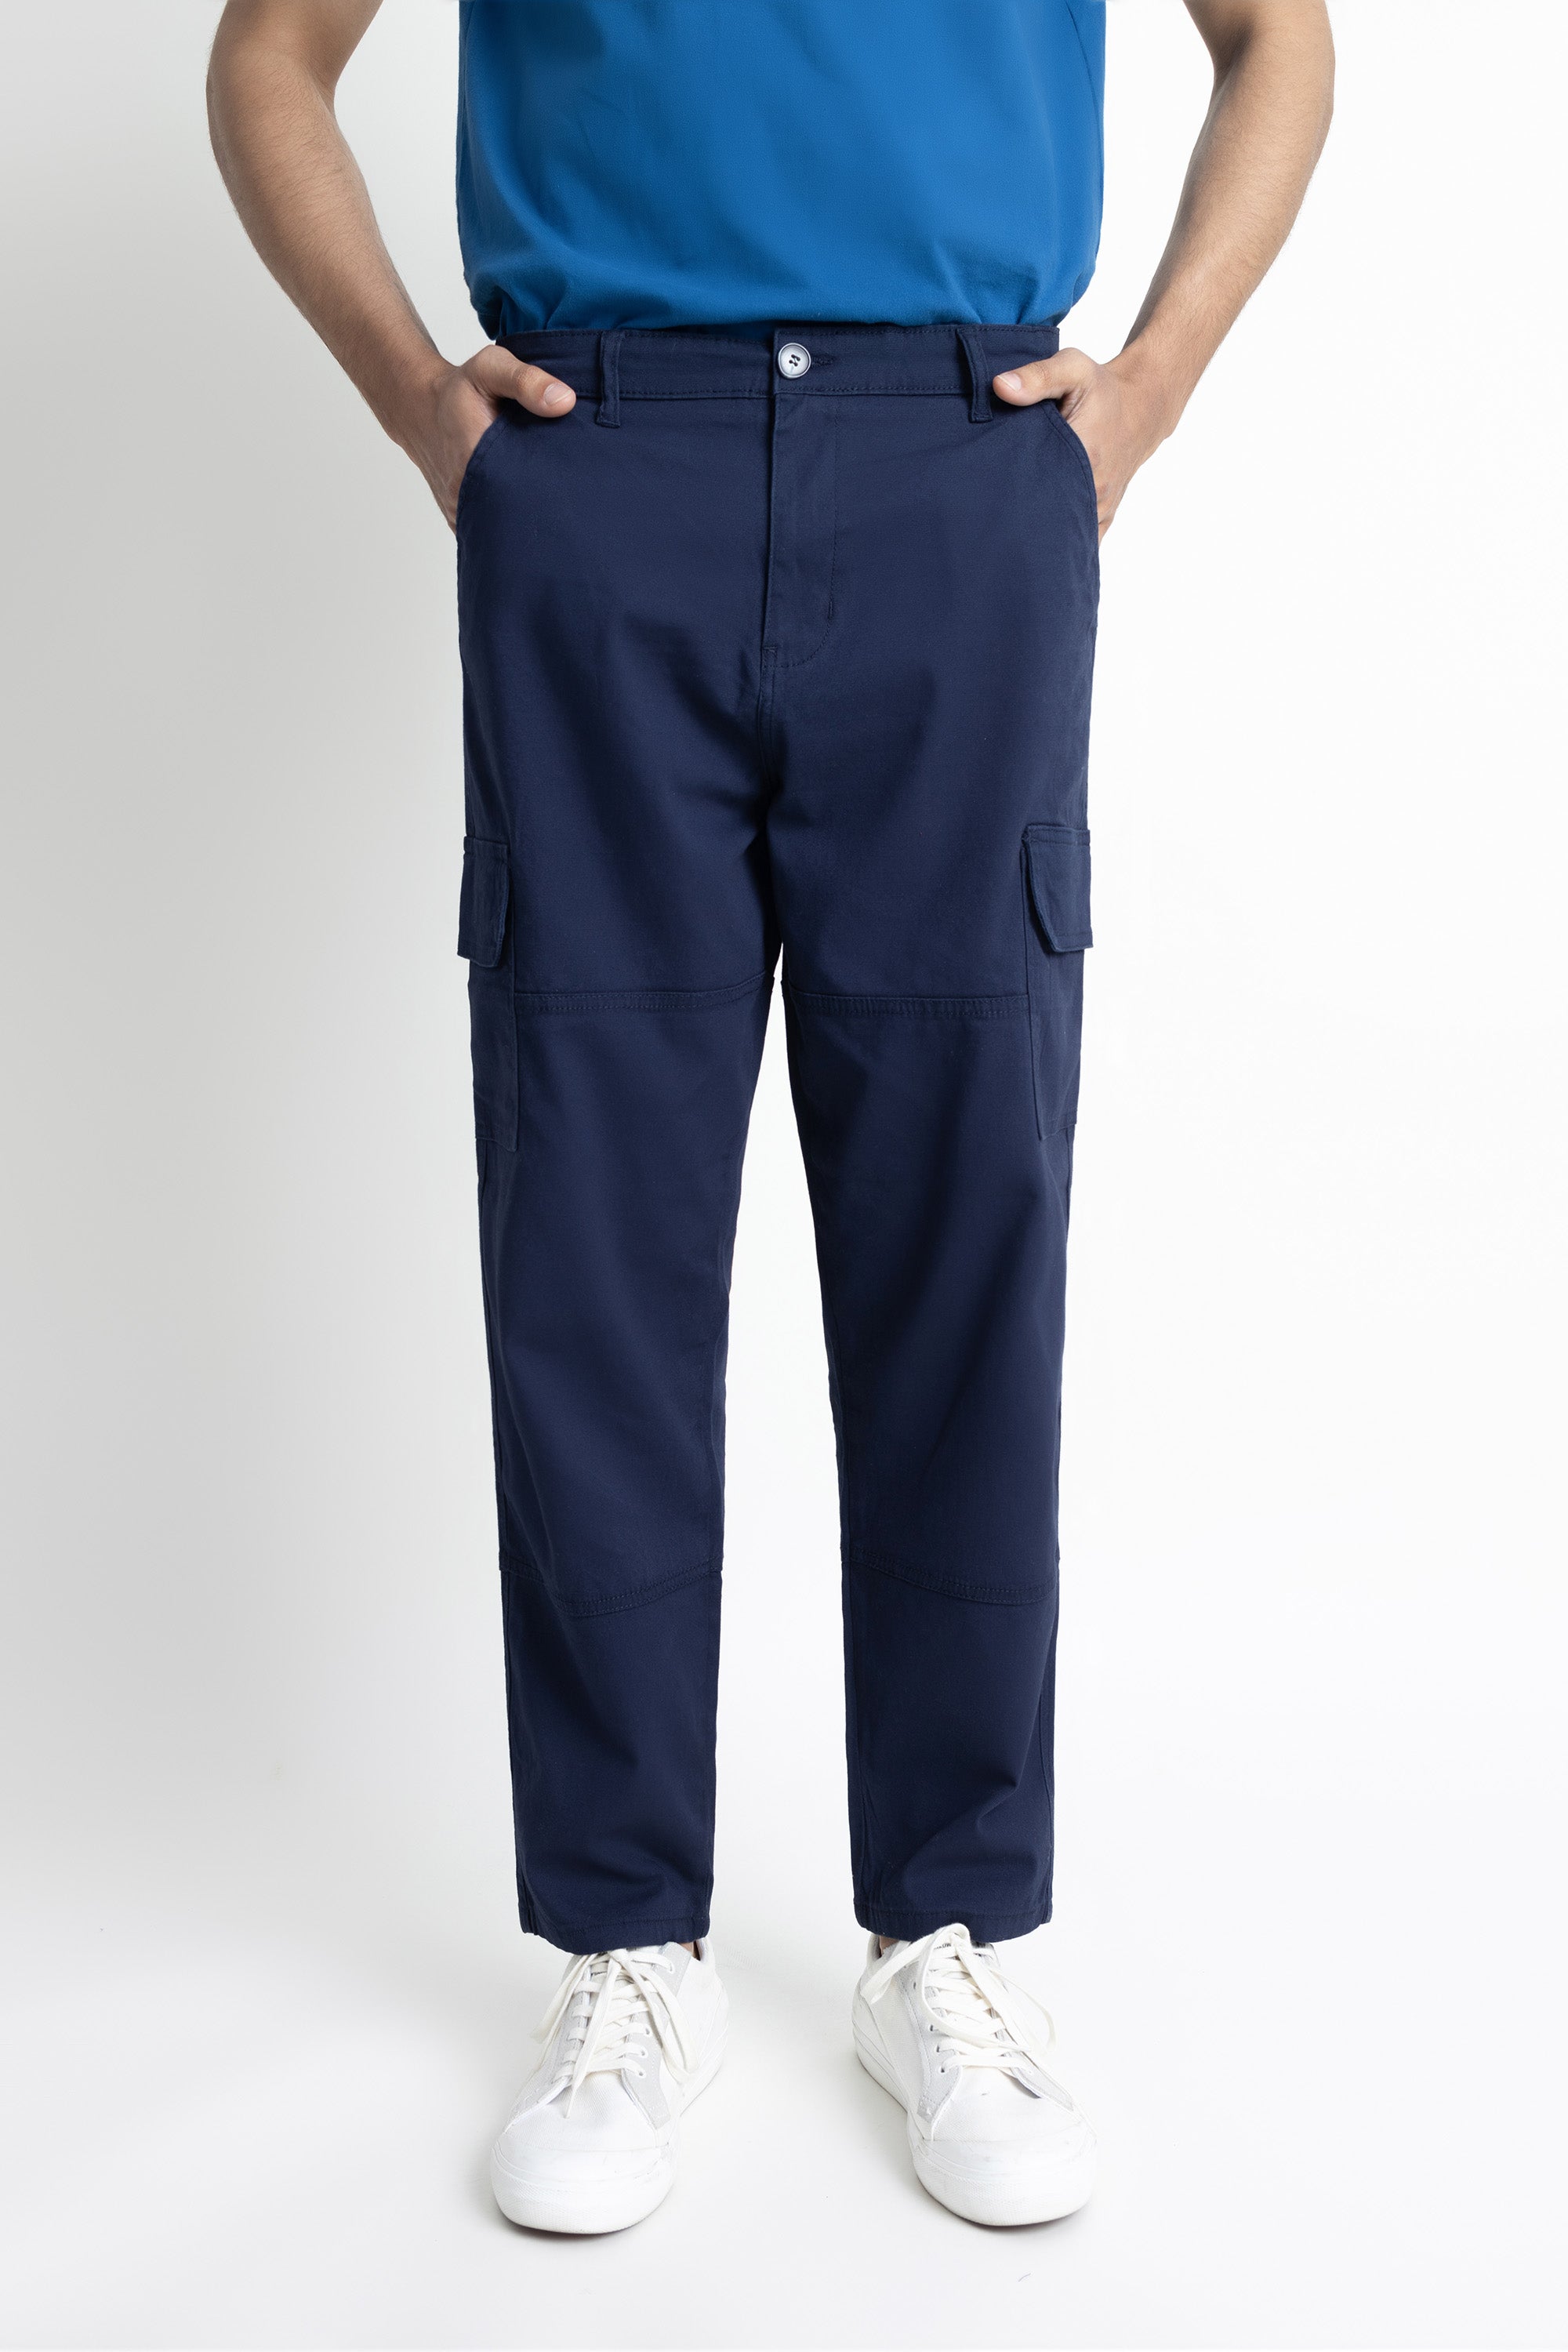 The Navy Blue Cargo Pants –